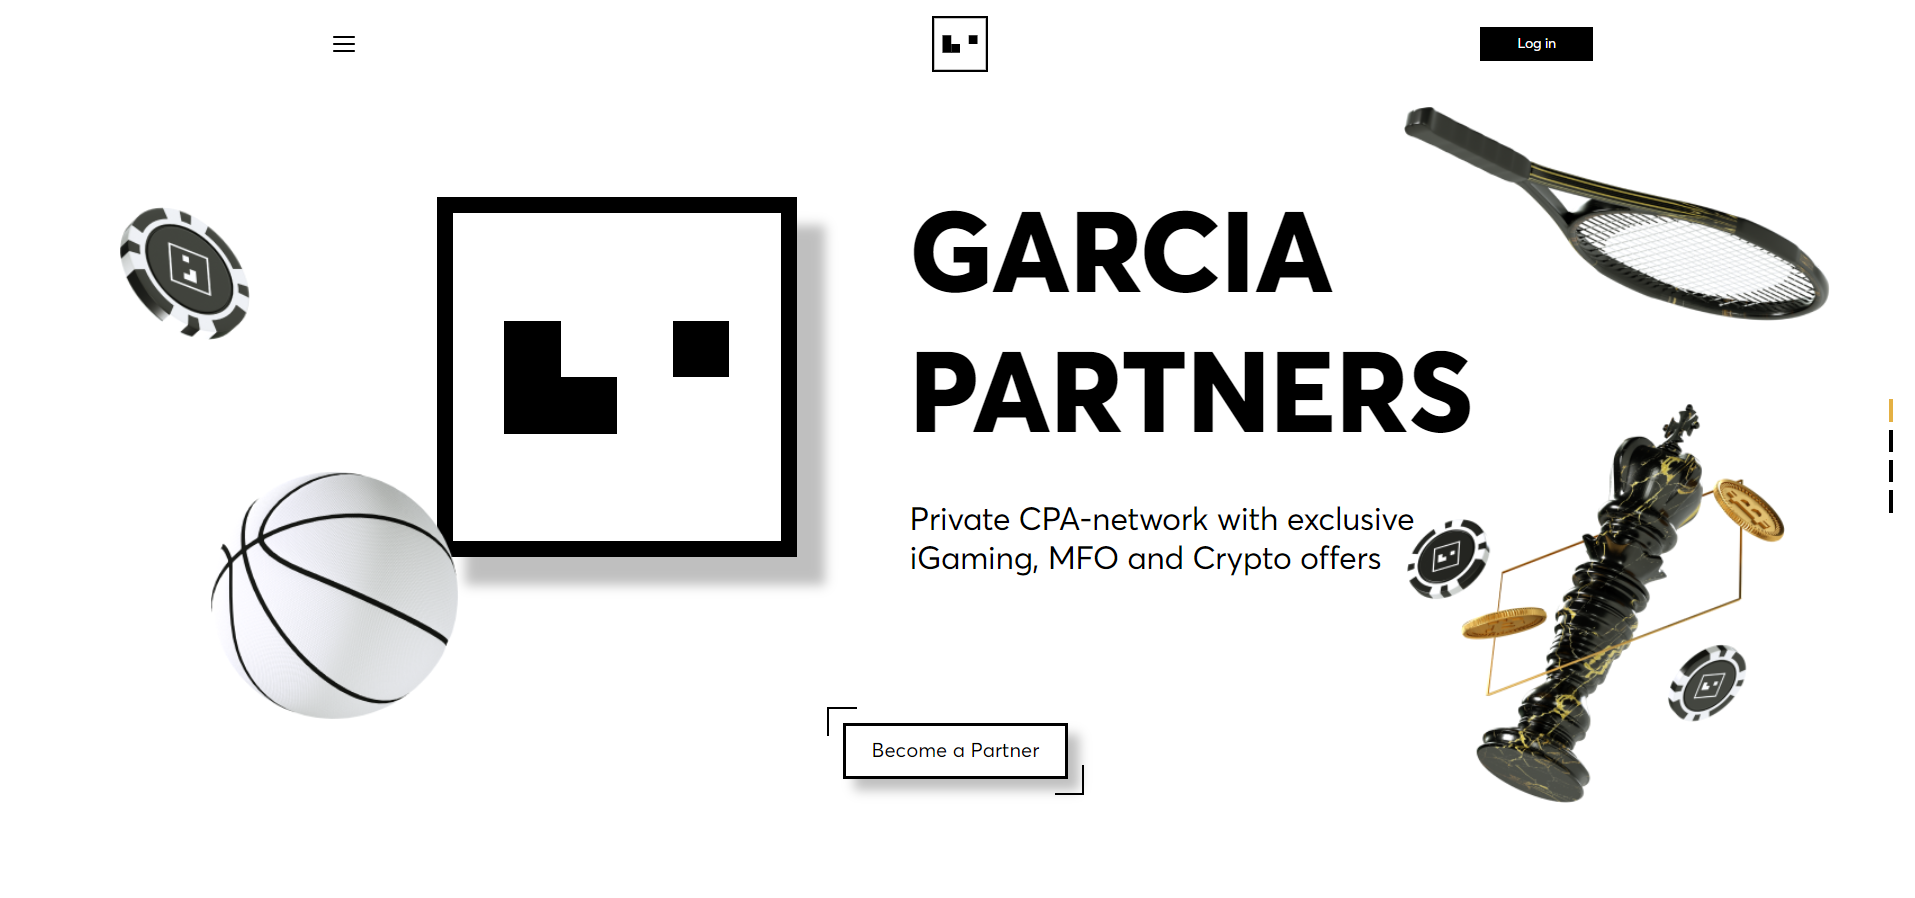 Garcia Partners Affiliate Network Review